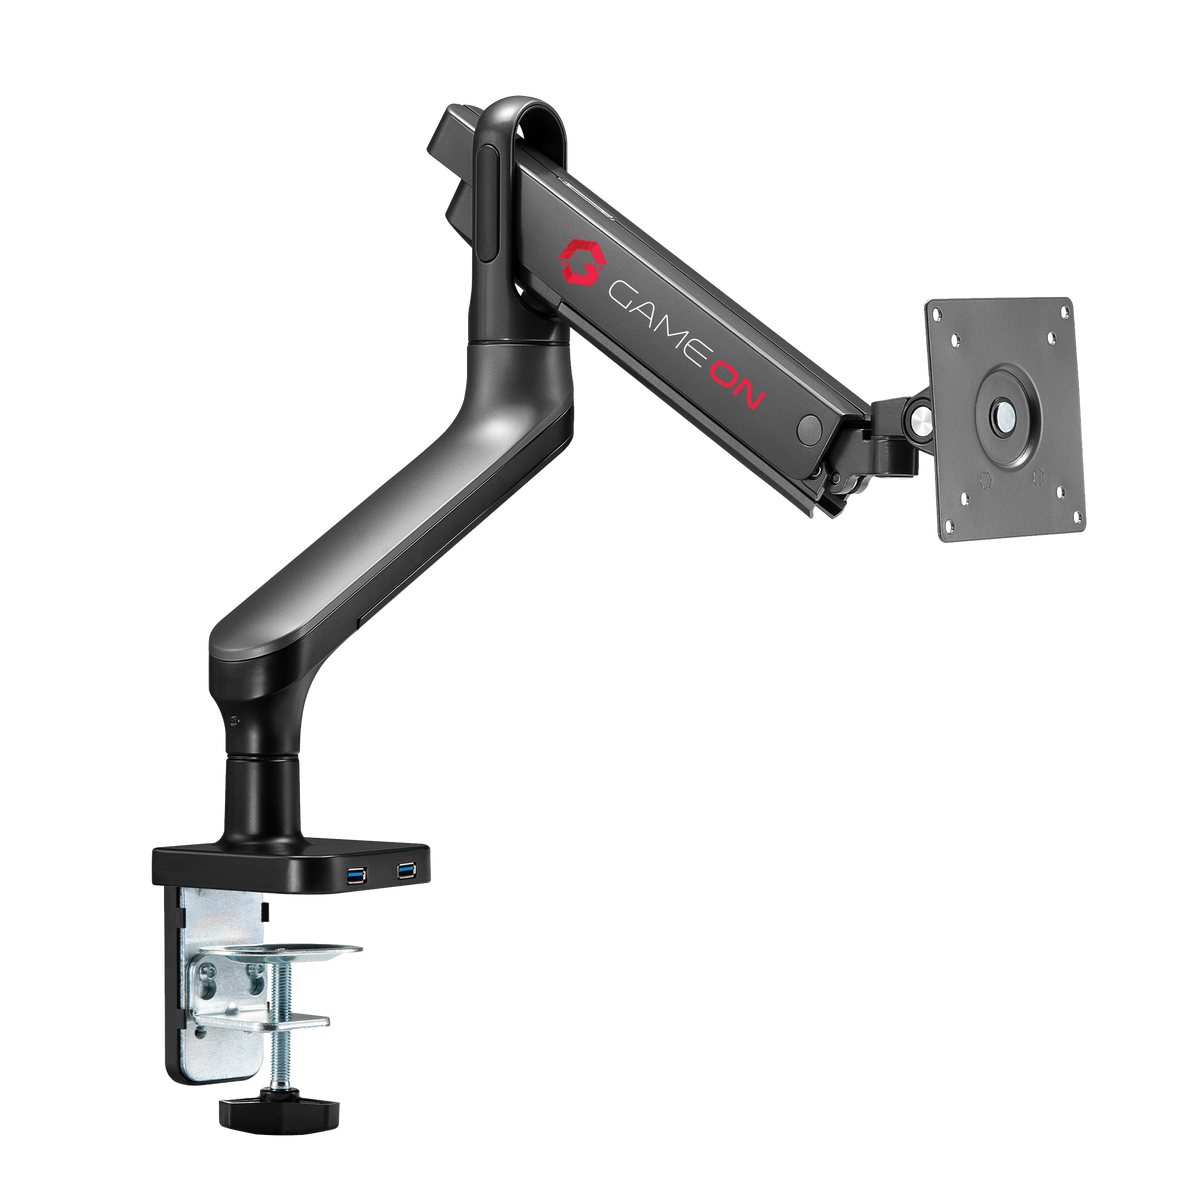 GAMEON GO-2137 Premium Aluminum Spring-Assisted Single Monitor Arm, Stand And Mount For Gaming And Office Use, 17" - 33", With USB Port, Each Arm Up To 9 KG, Space Grey